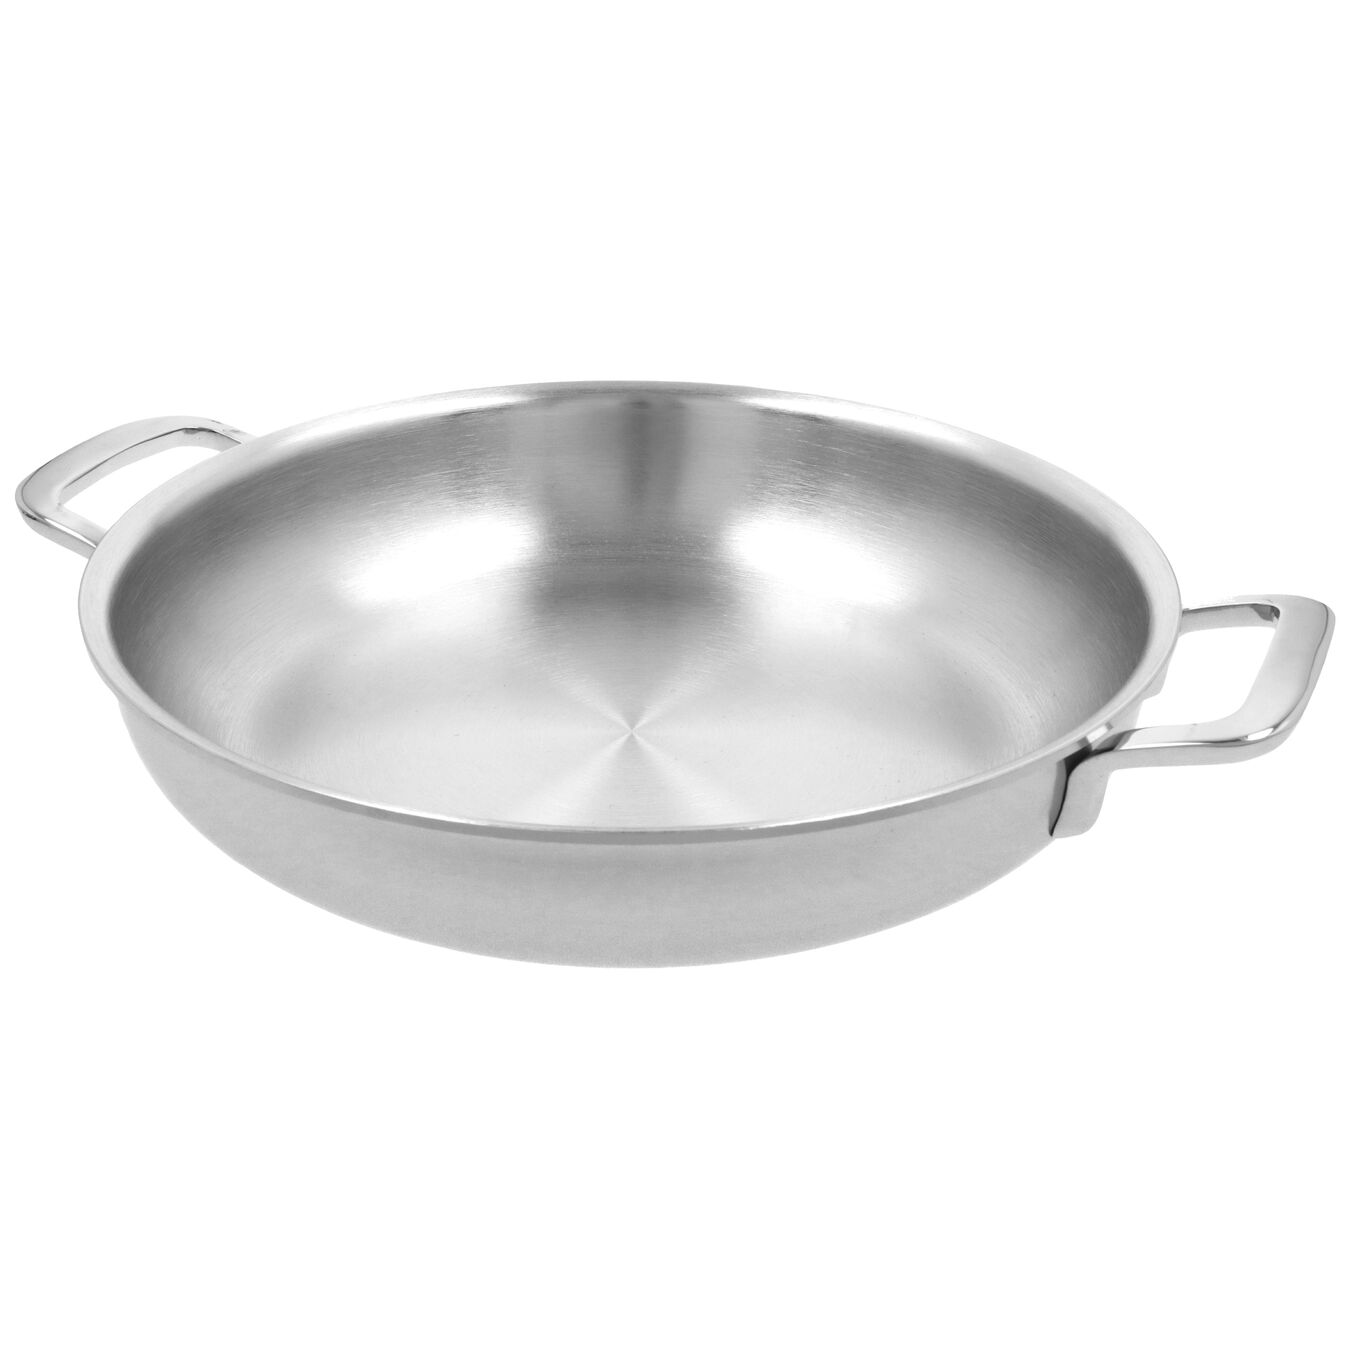 28 cm / 11 inch 18/10 Stainless Steel Frying pan with 2 handles,,large 3